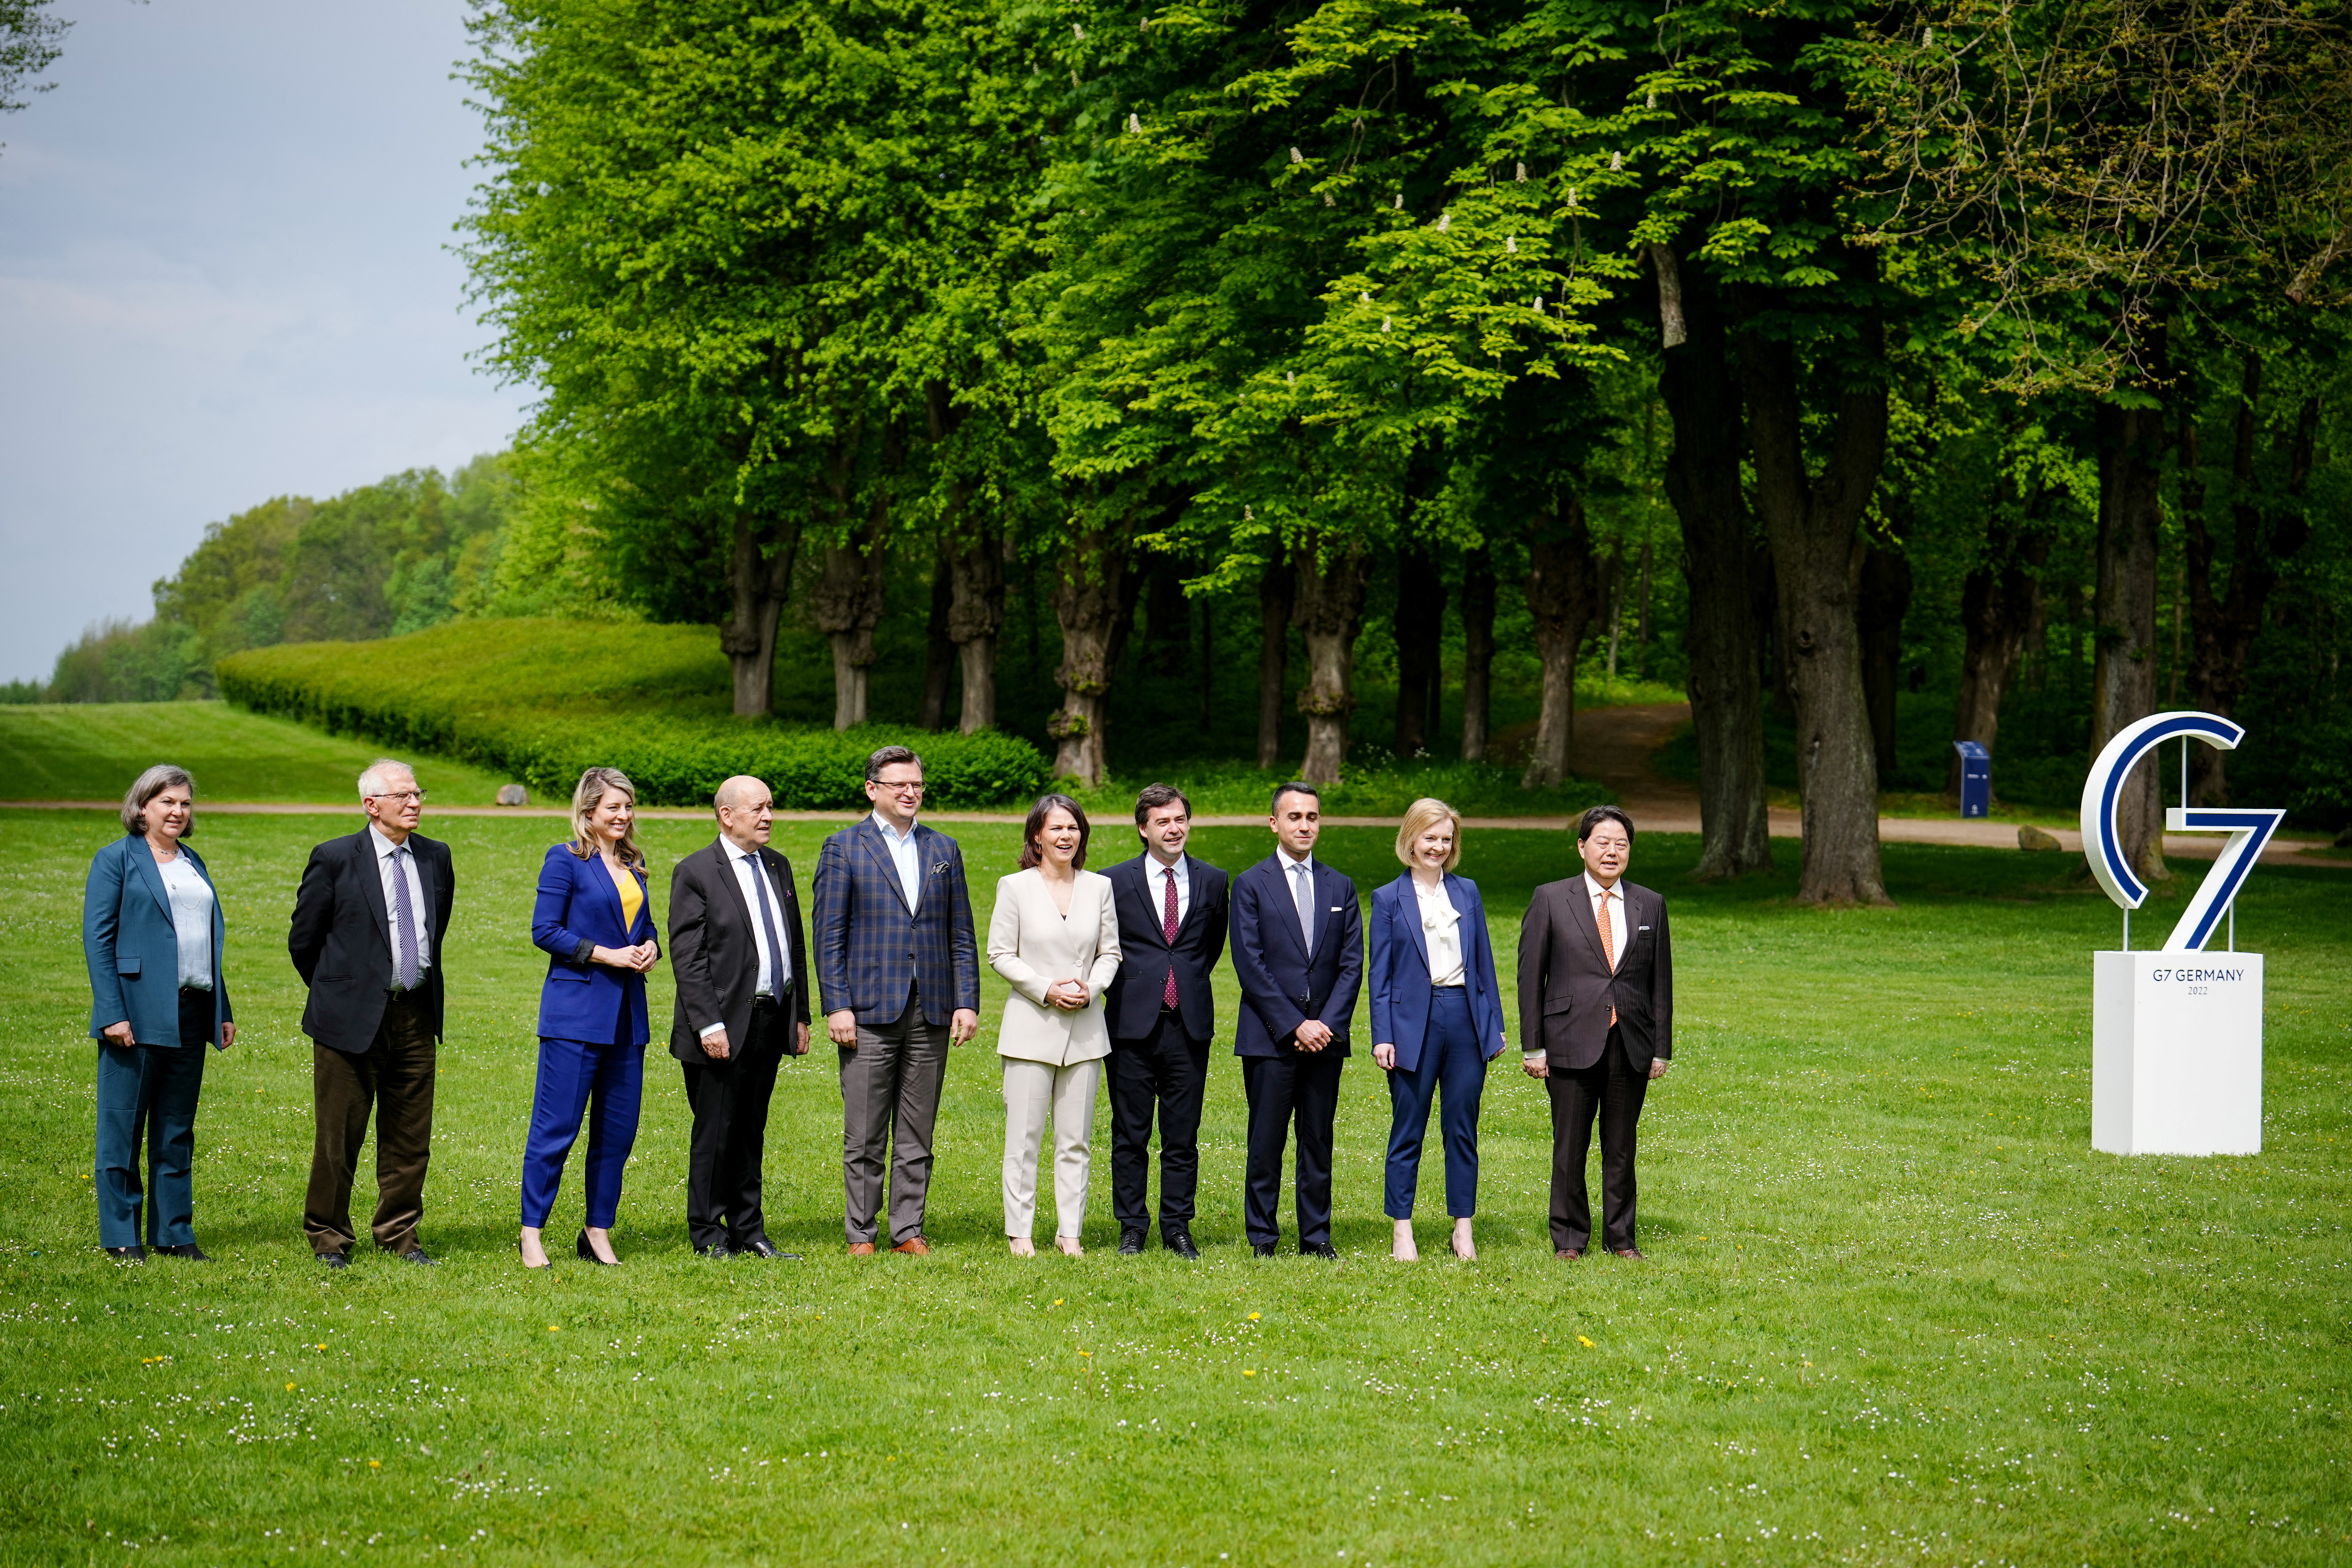 G7 foreign ministers' summit in Weissenhaeuser Strand